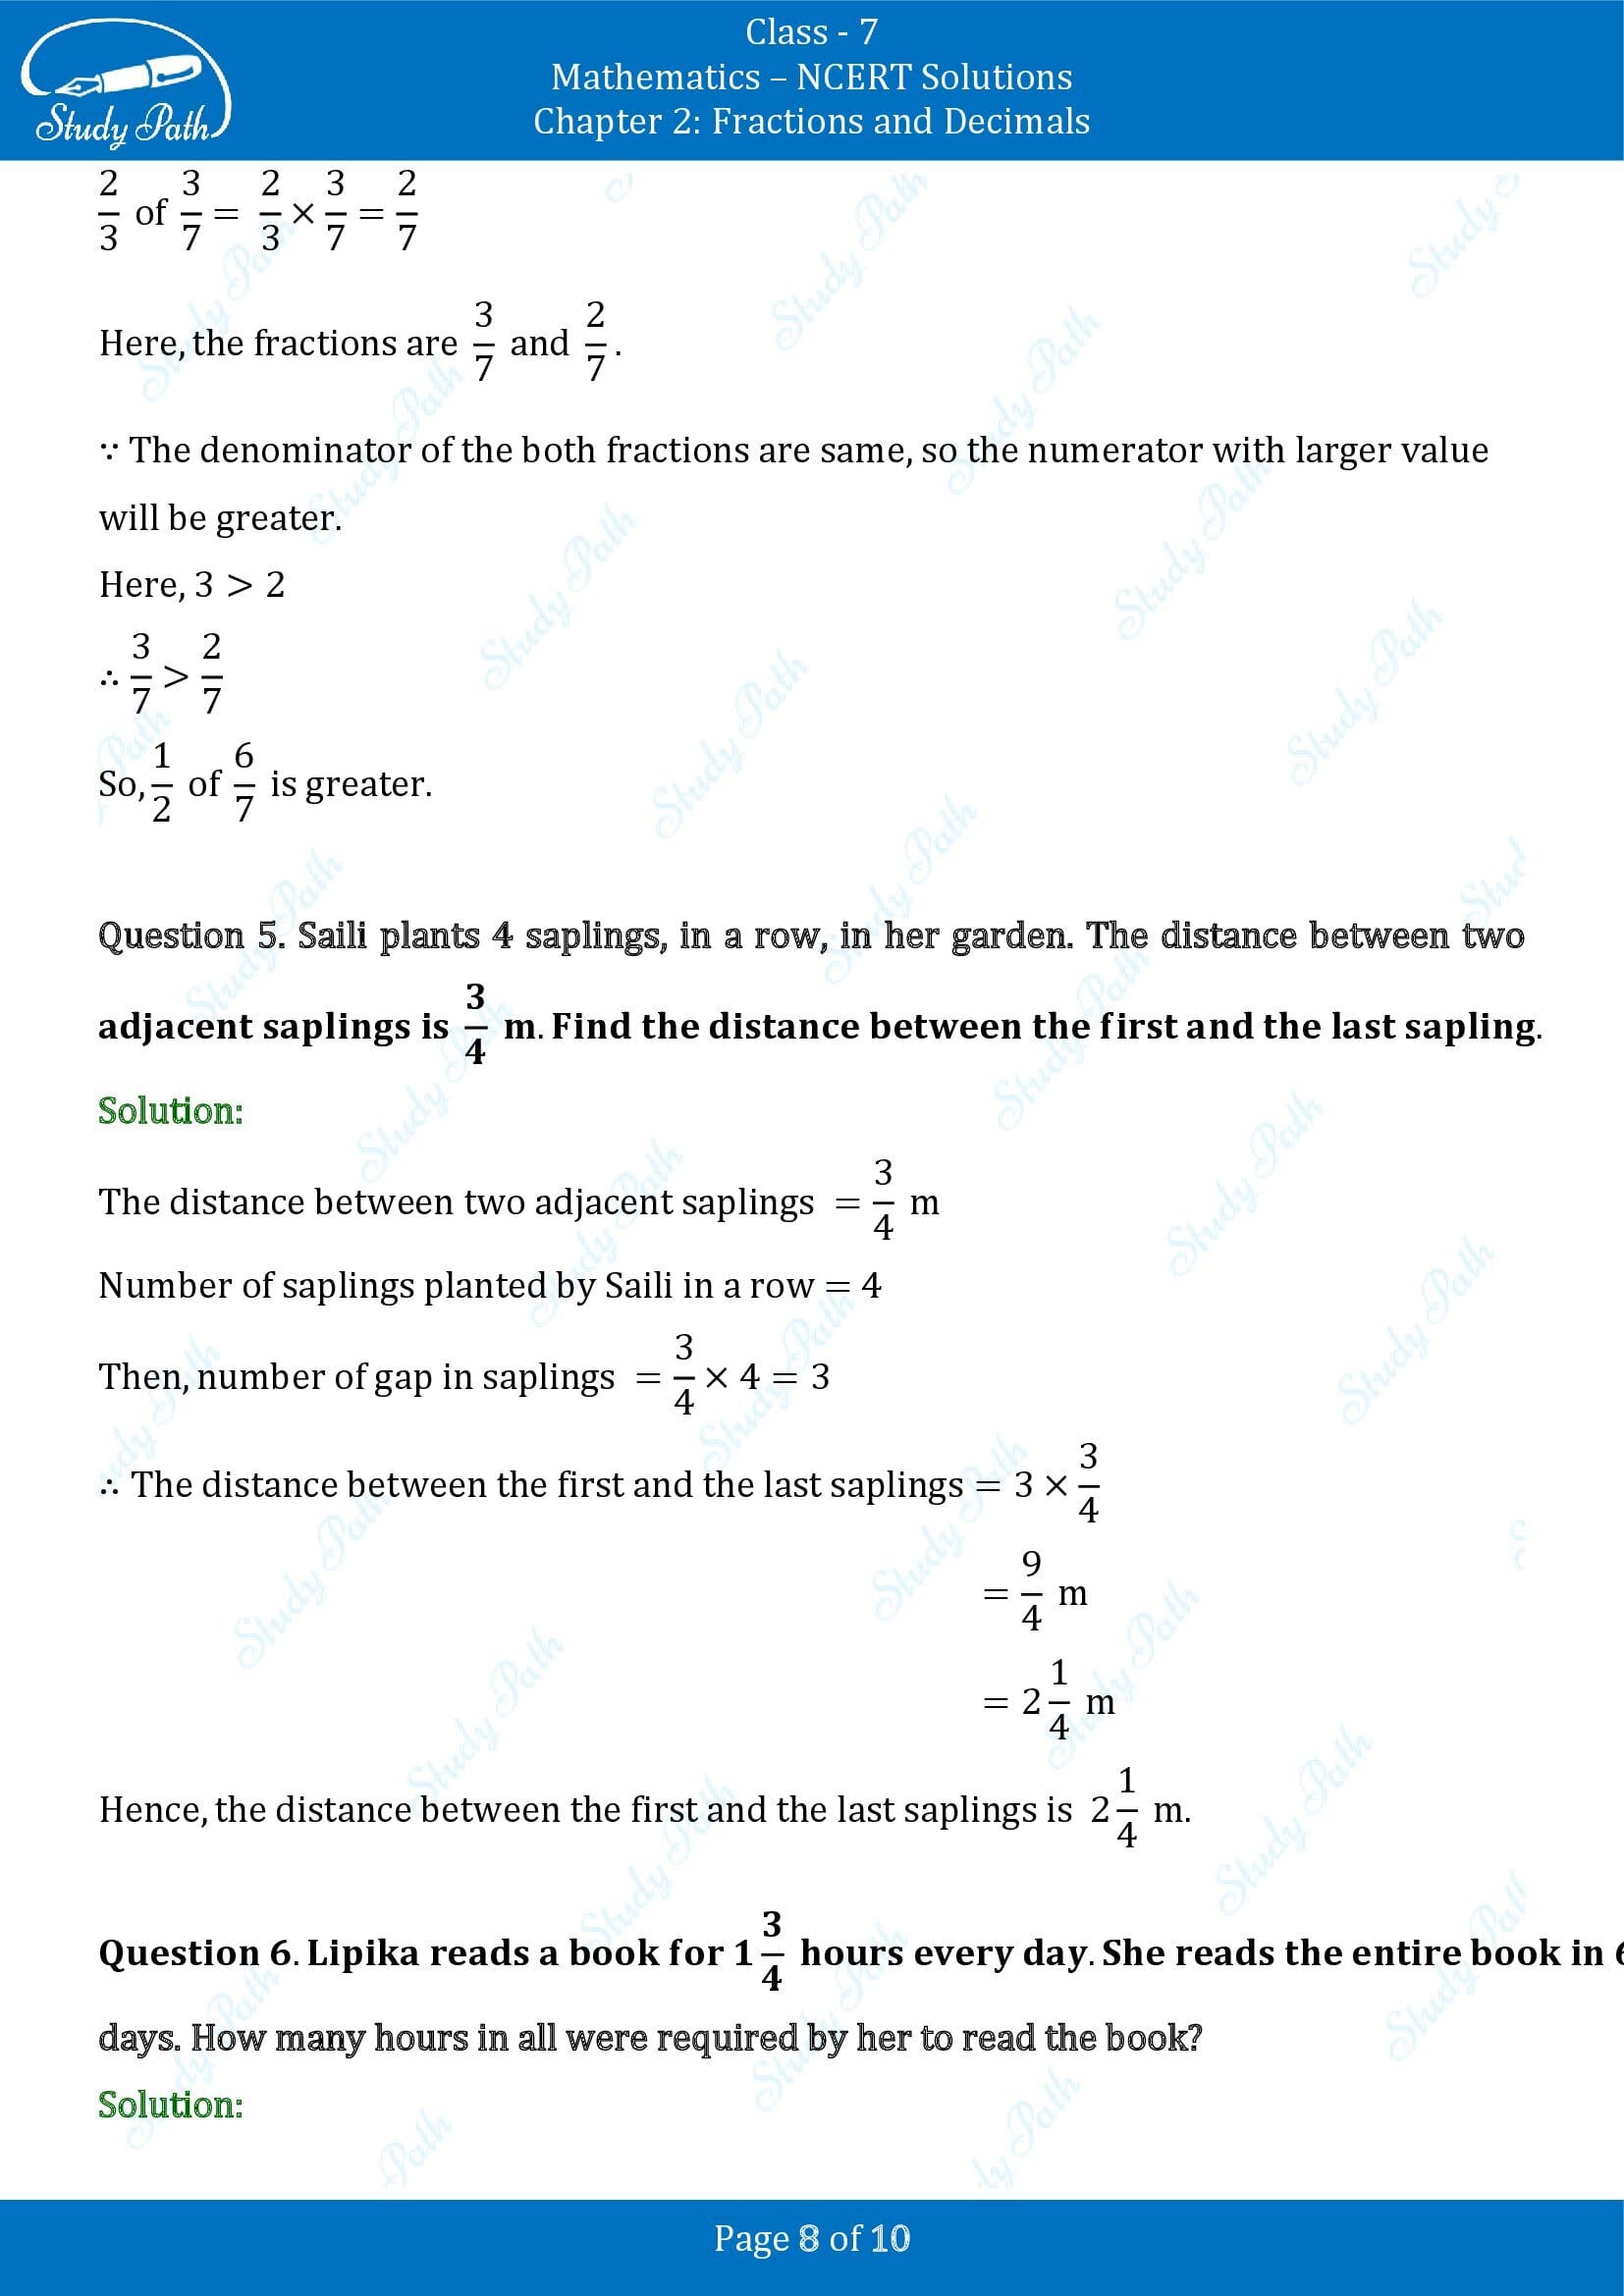 NCERT Solutions for Class 7 Maths Chapter 2 Fractions and Decimals Exercise 2.3 00008